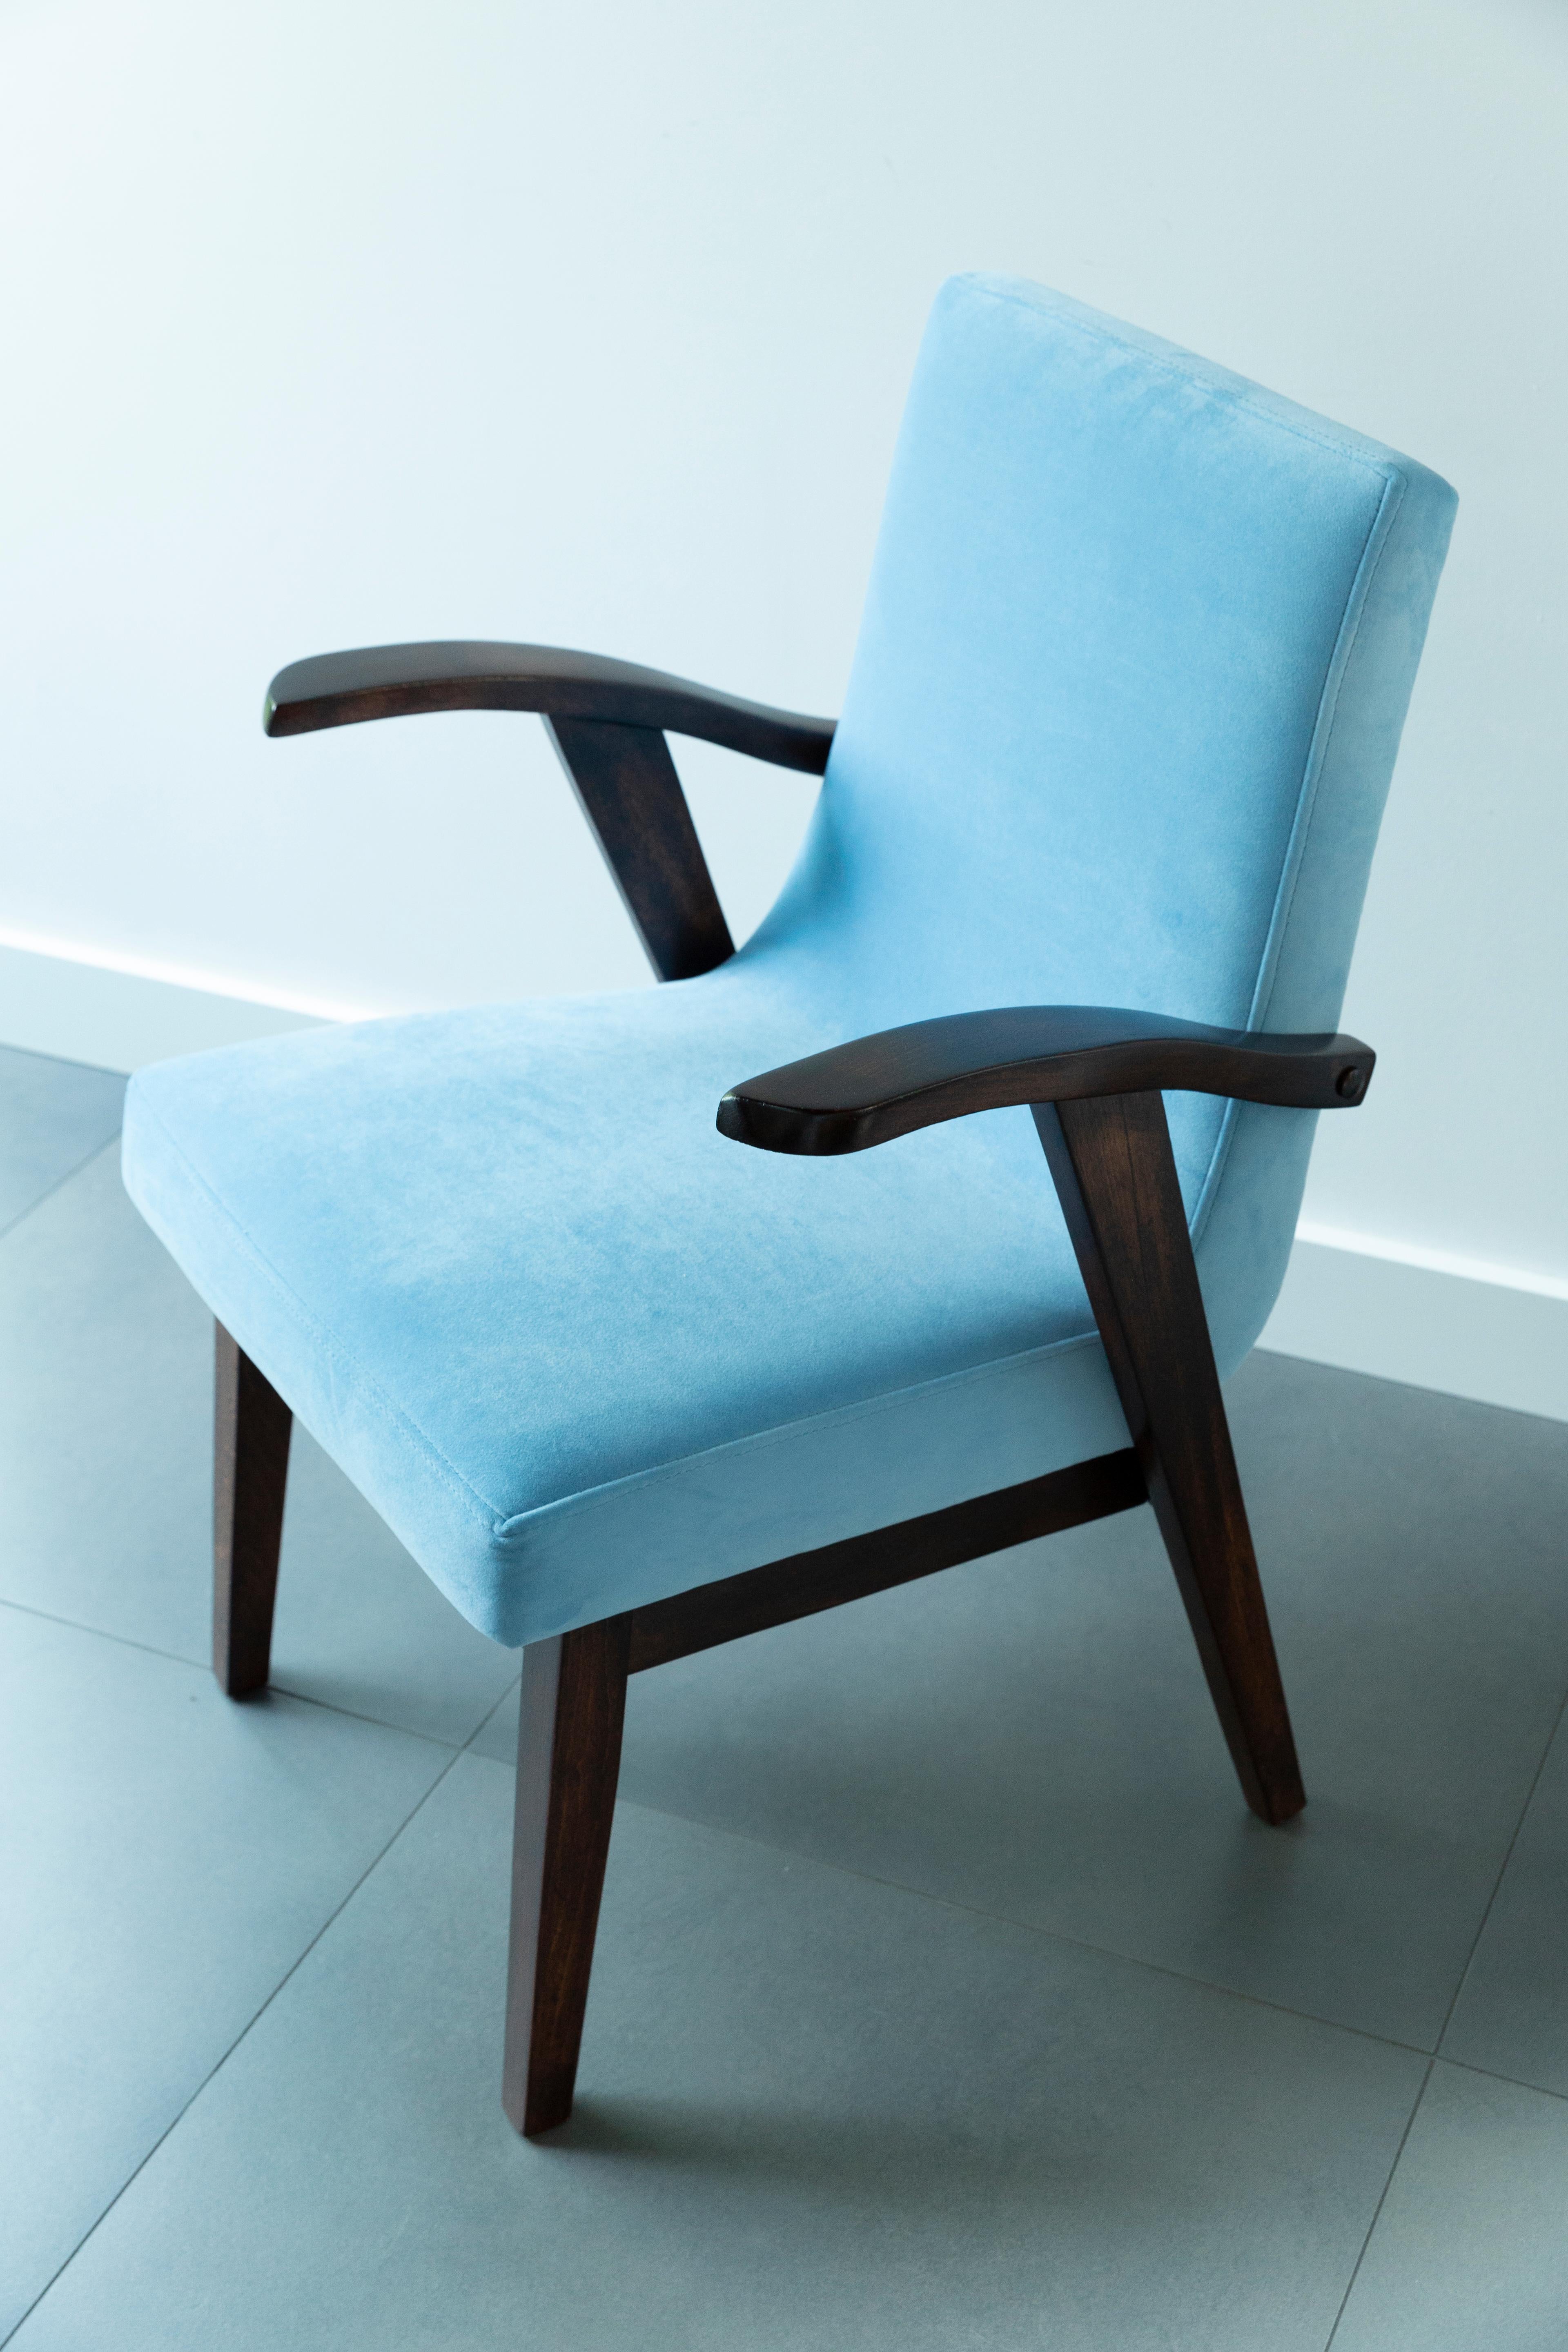 Set of Six 20th Century Armchairs in Baby Blue Velvet, Mieczyslaw Puchala, 1960s For Sale 5